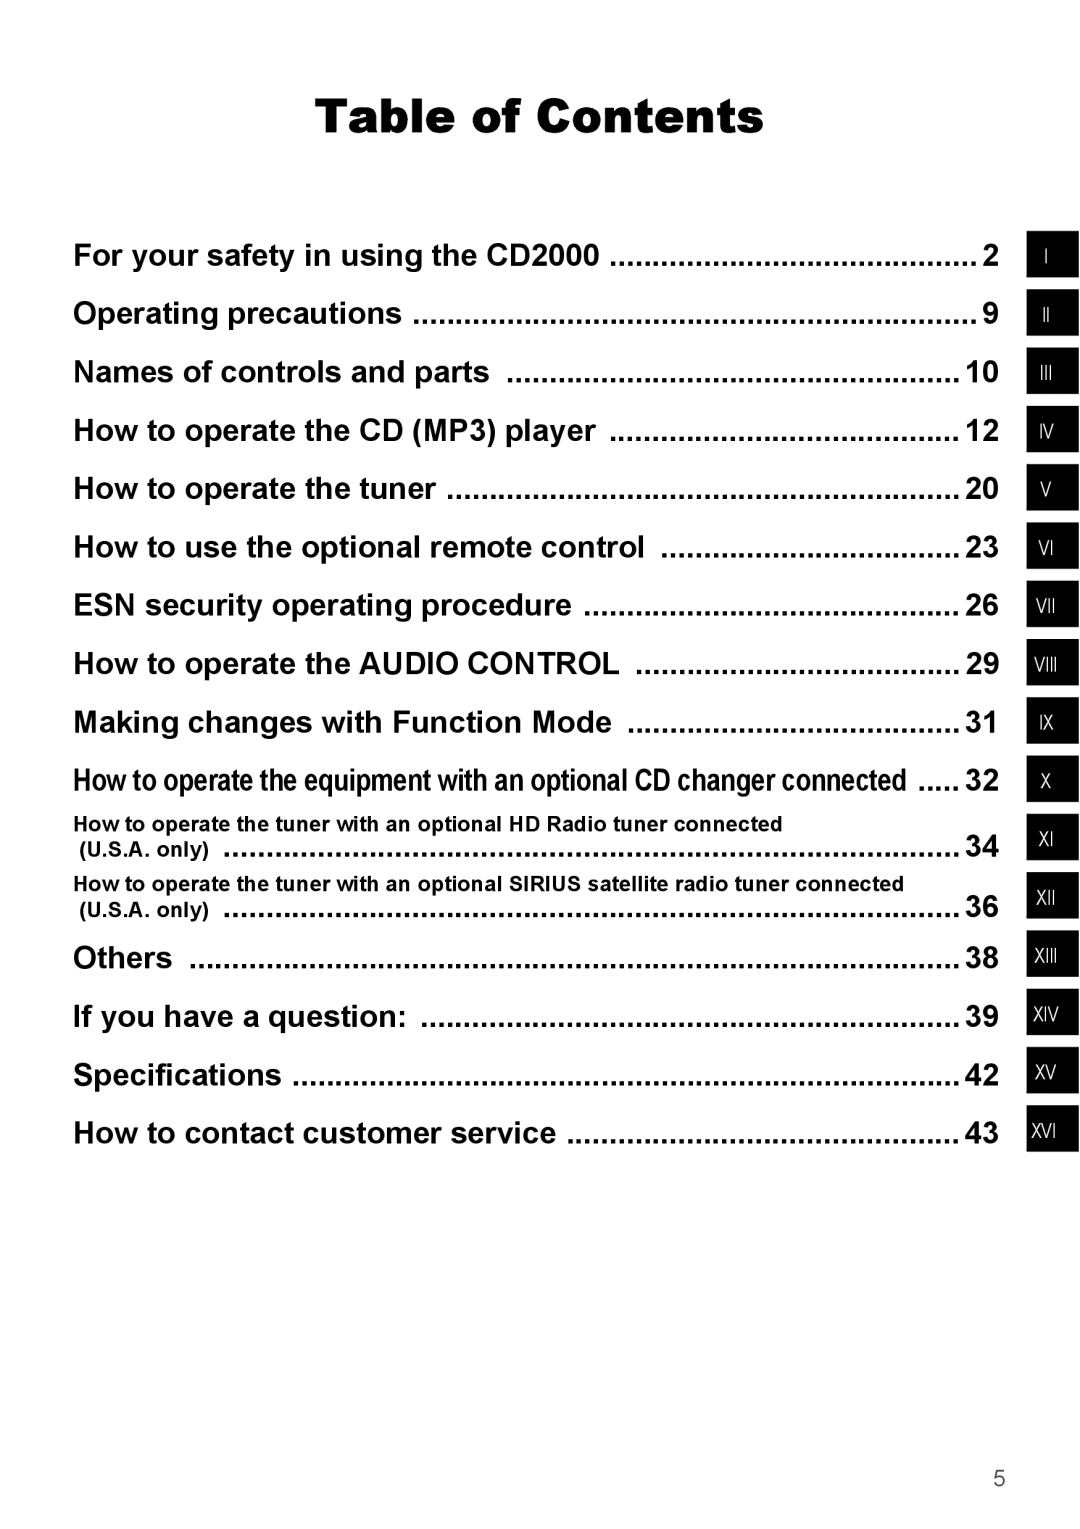 Eclipse - Fujitsu Ten CD2000 manual Table of Contents, How to operate the equipment with an optional CD changer connected 